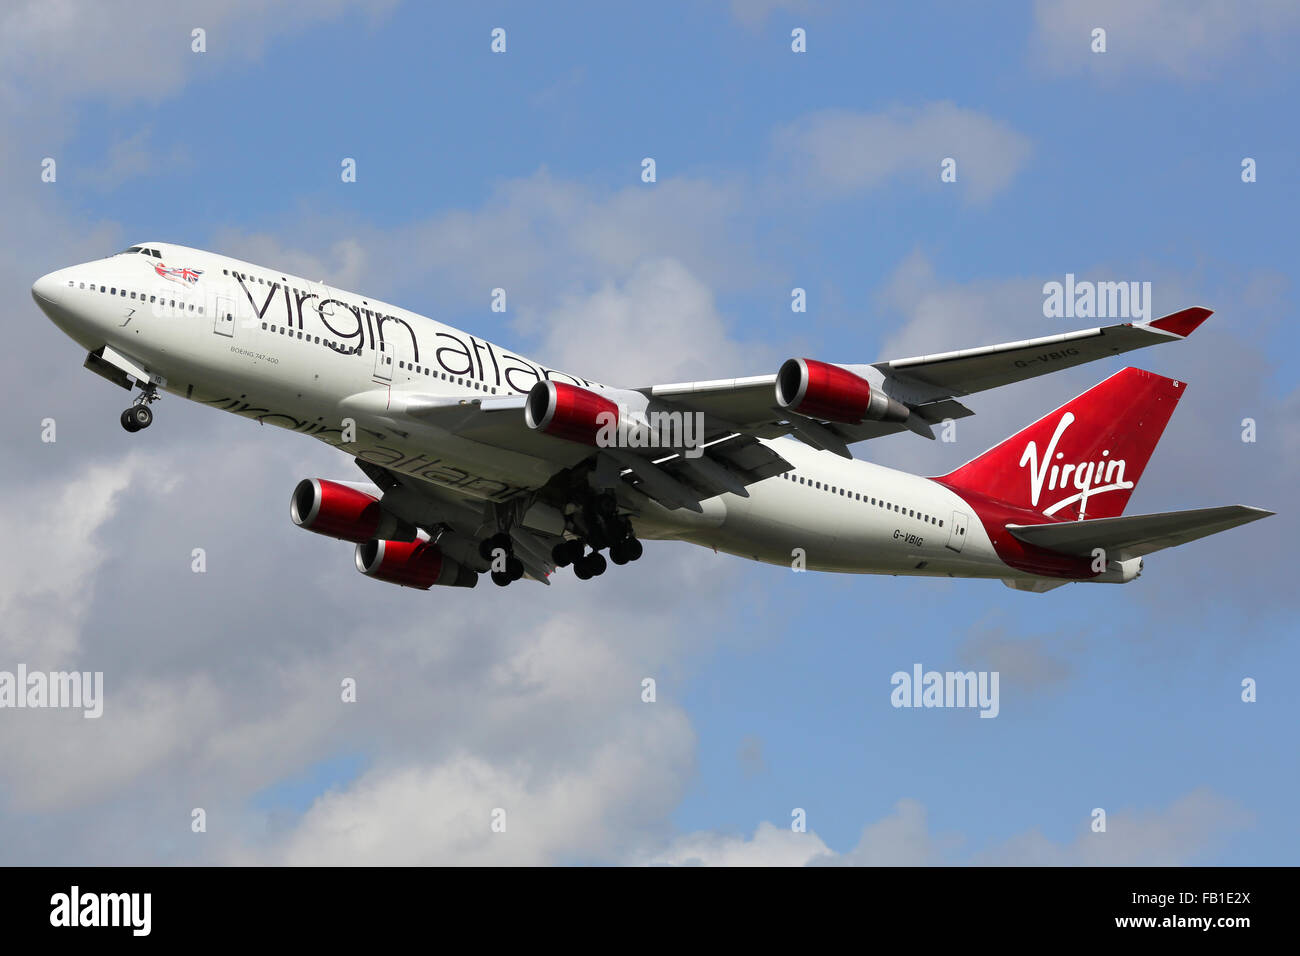 London Heathrow, United Kingdom - August 28, 2015: A Virgin Atlantic Boeing 747-400 with the registration G-VBIG taking off from Stock Photo